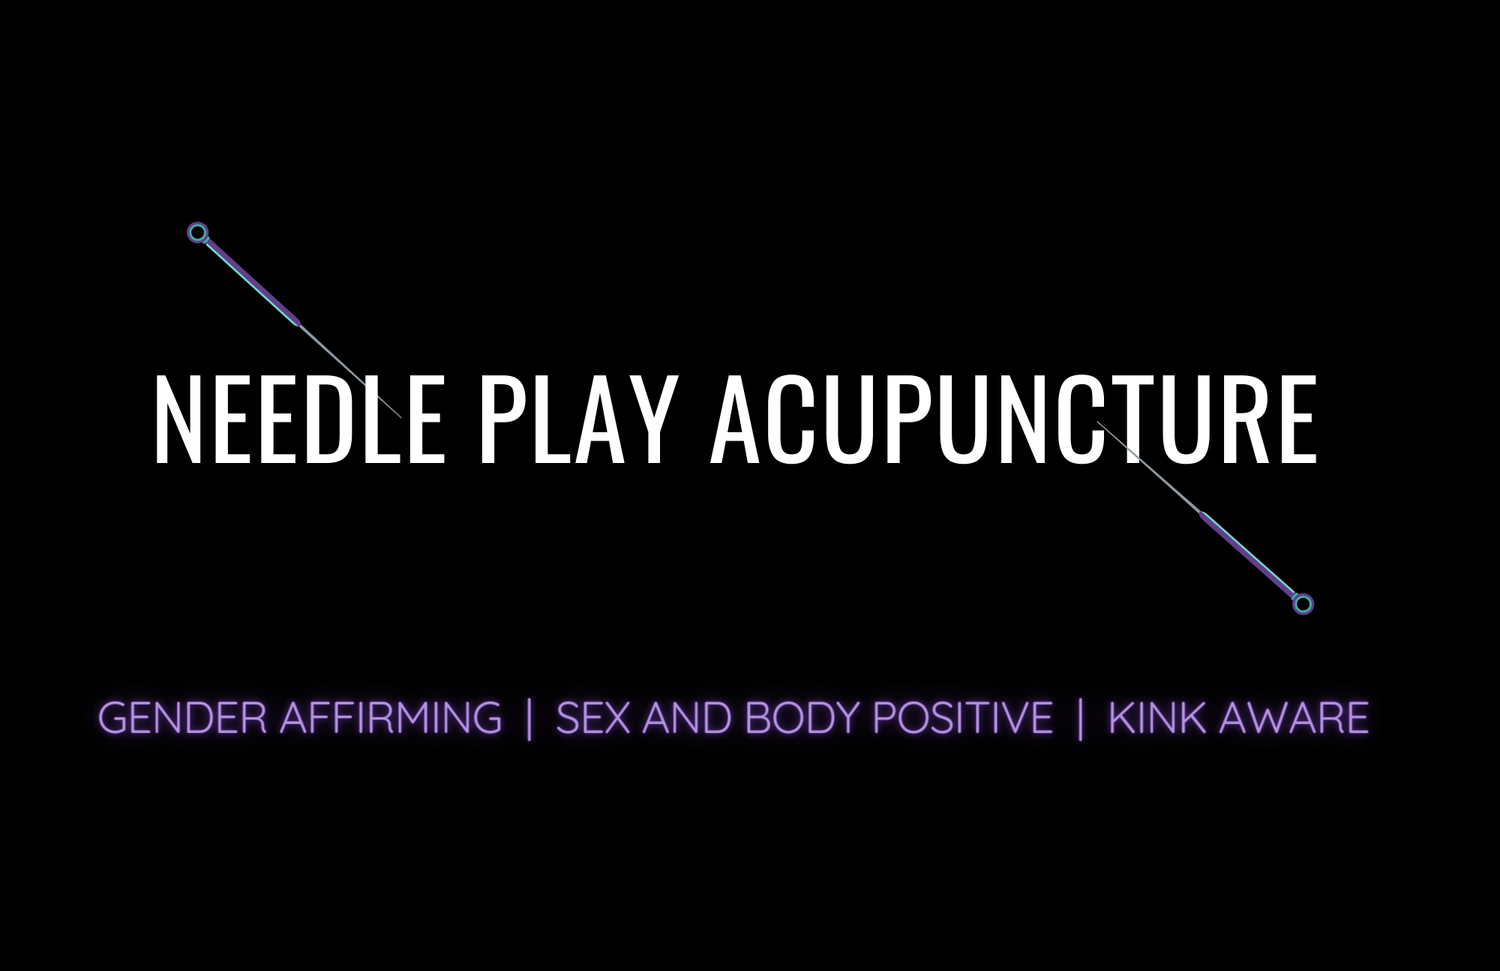 Needle Play Acupuncture